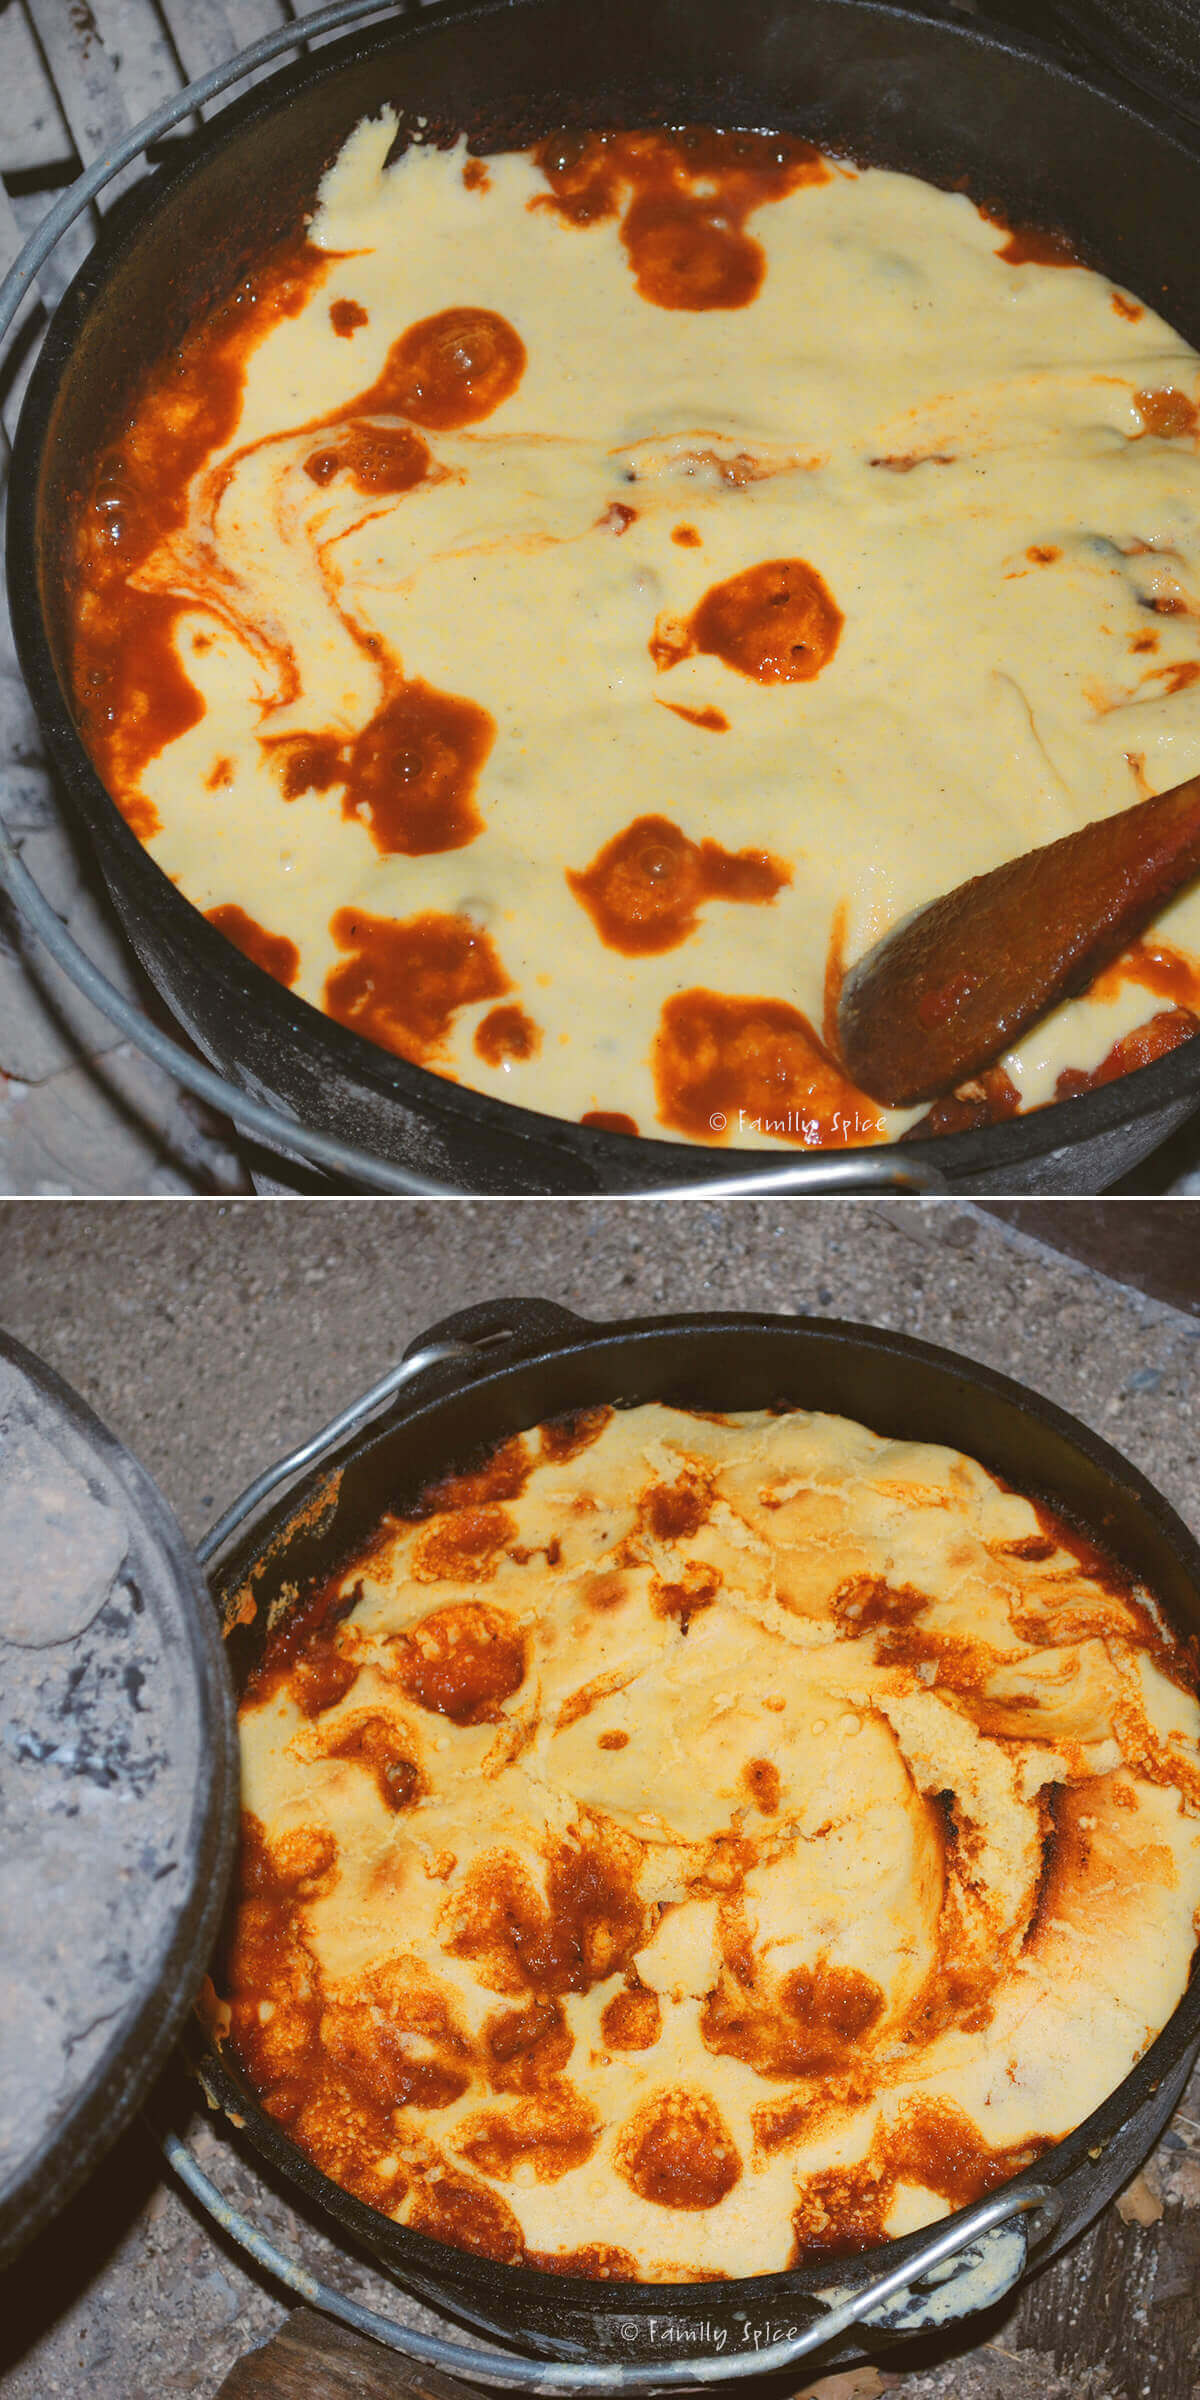 Collage of cornbread batter baking on top of simmering chili in a cast iron Dutch oven